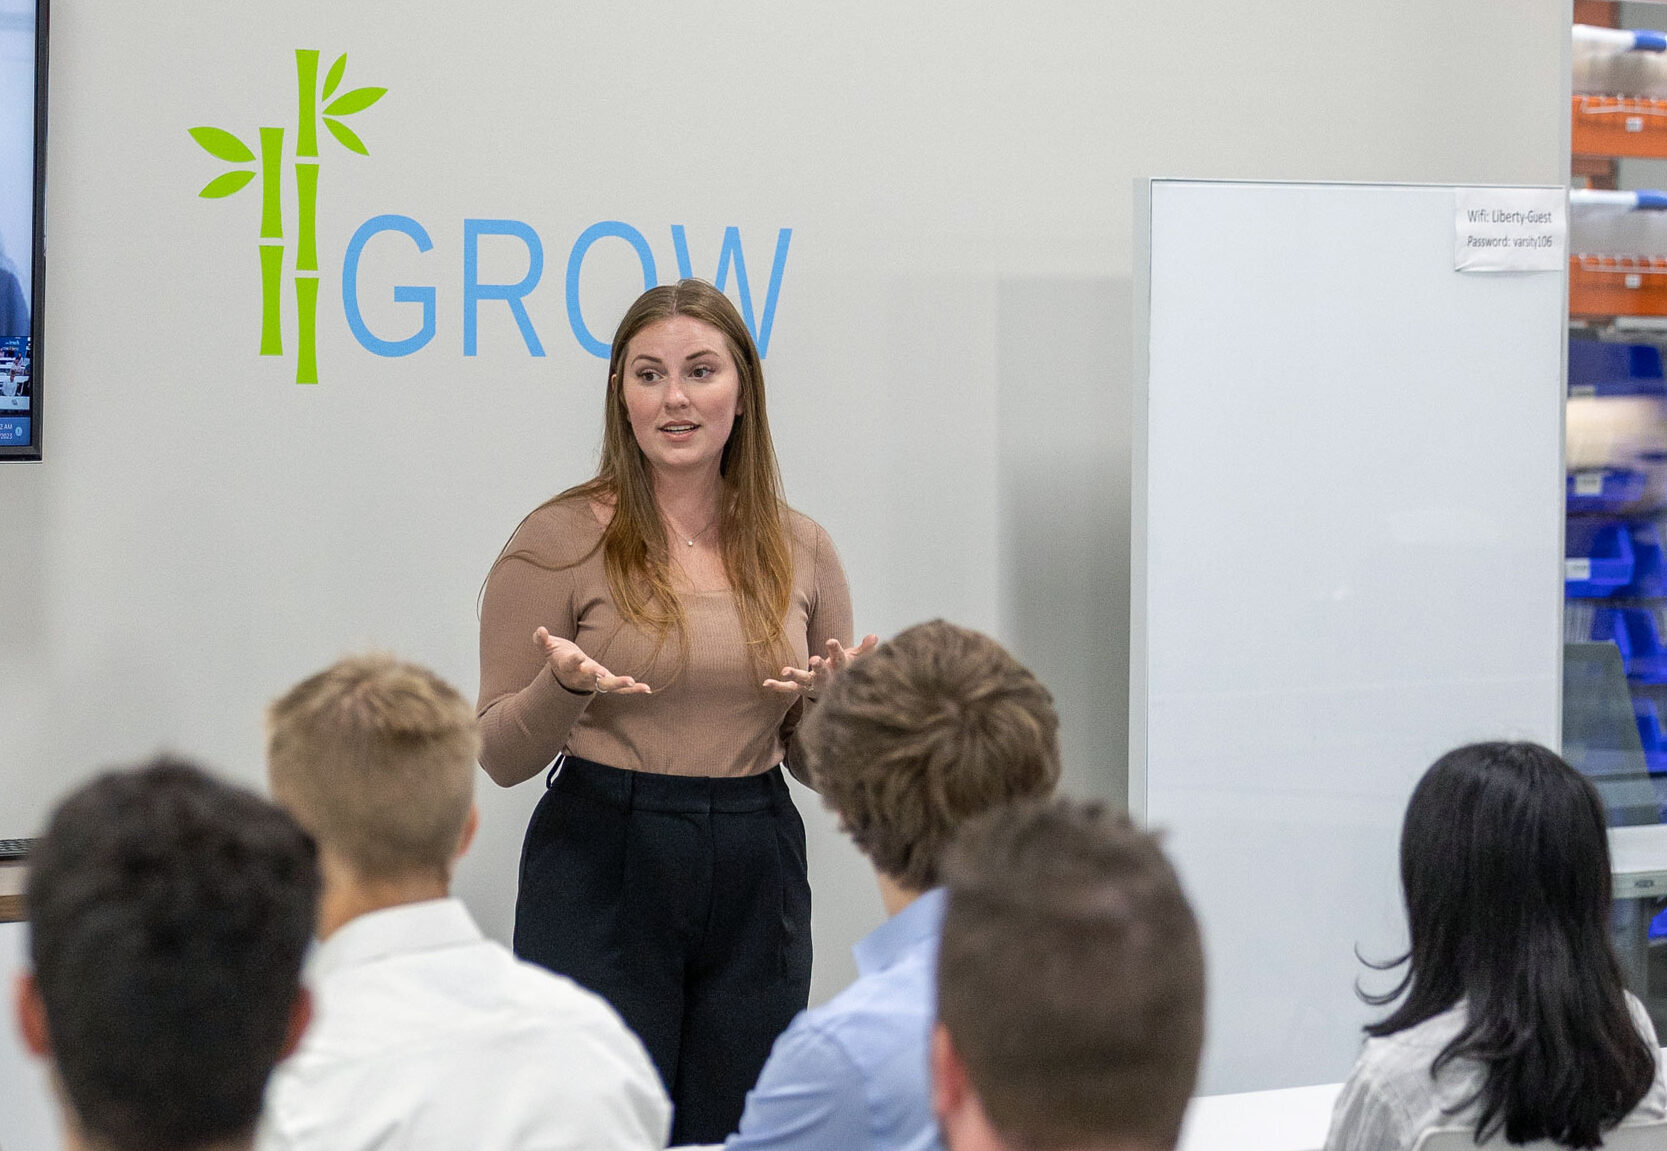 Krystina is standing and speaking to a group of interns in front of a TV, a logo that says "GROW" and a glass wall that looks into the Liberty Fulfillment Center